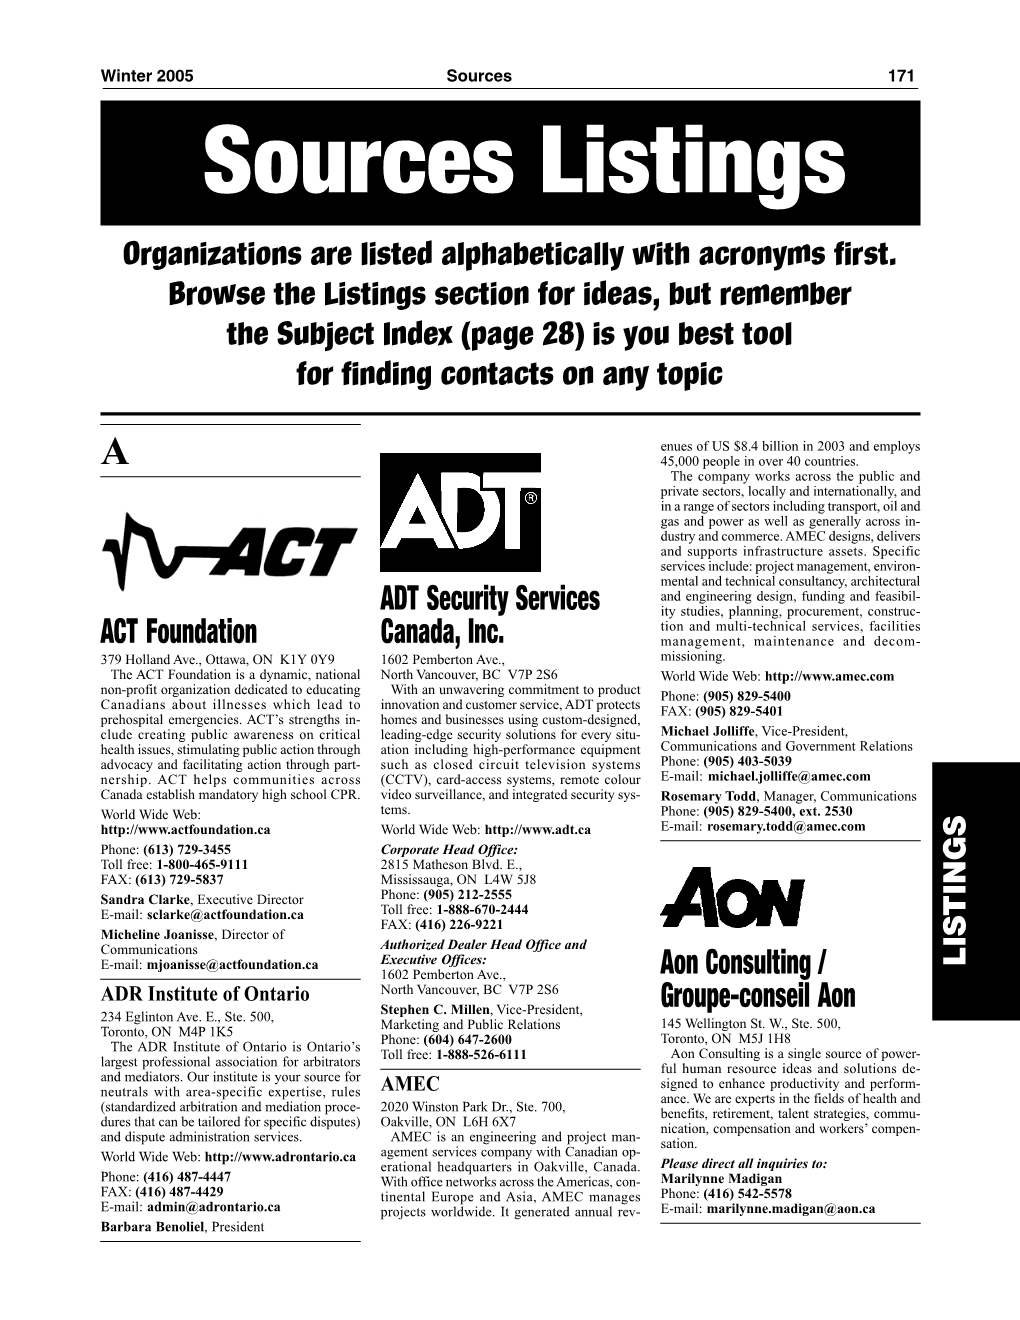 Listings Organizations Are Listed Alphabetically with Acronyms First